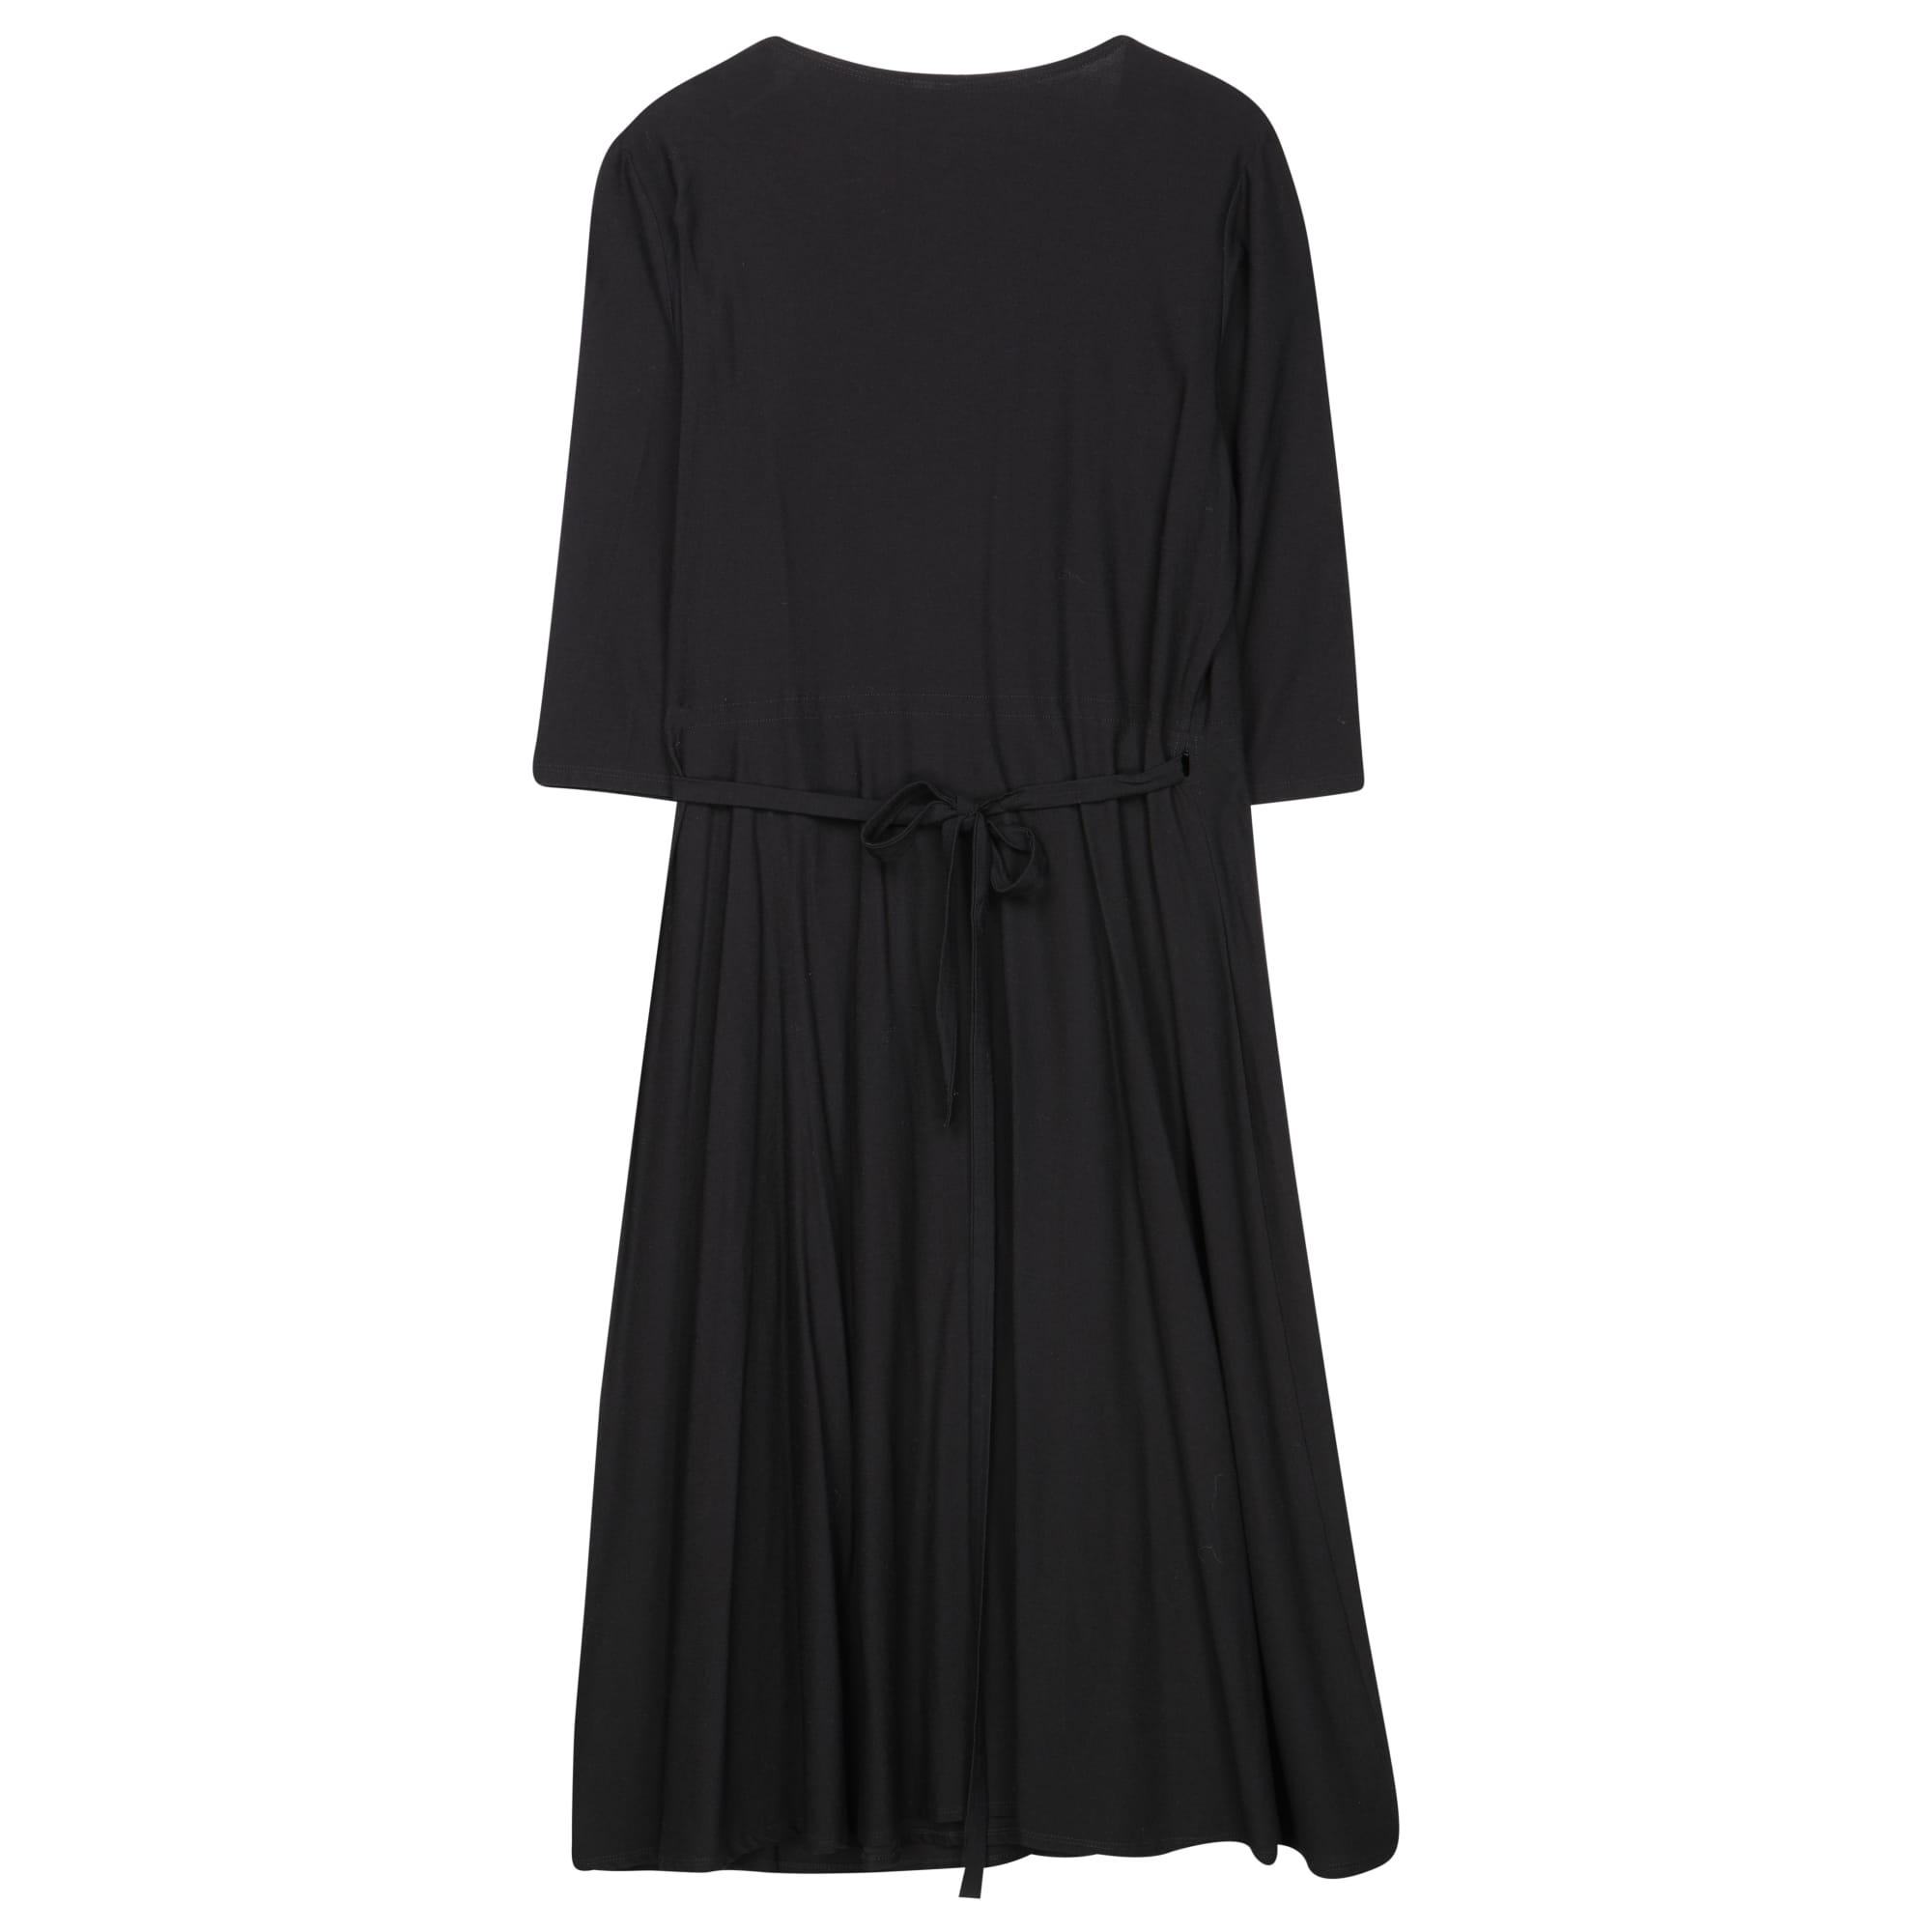 Used Lightweight Washable Stretch Crepe Dress Black | EILEEN FISHER RENEW